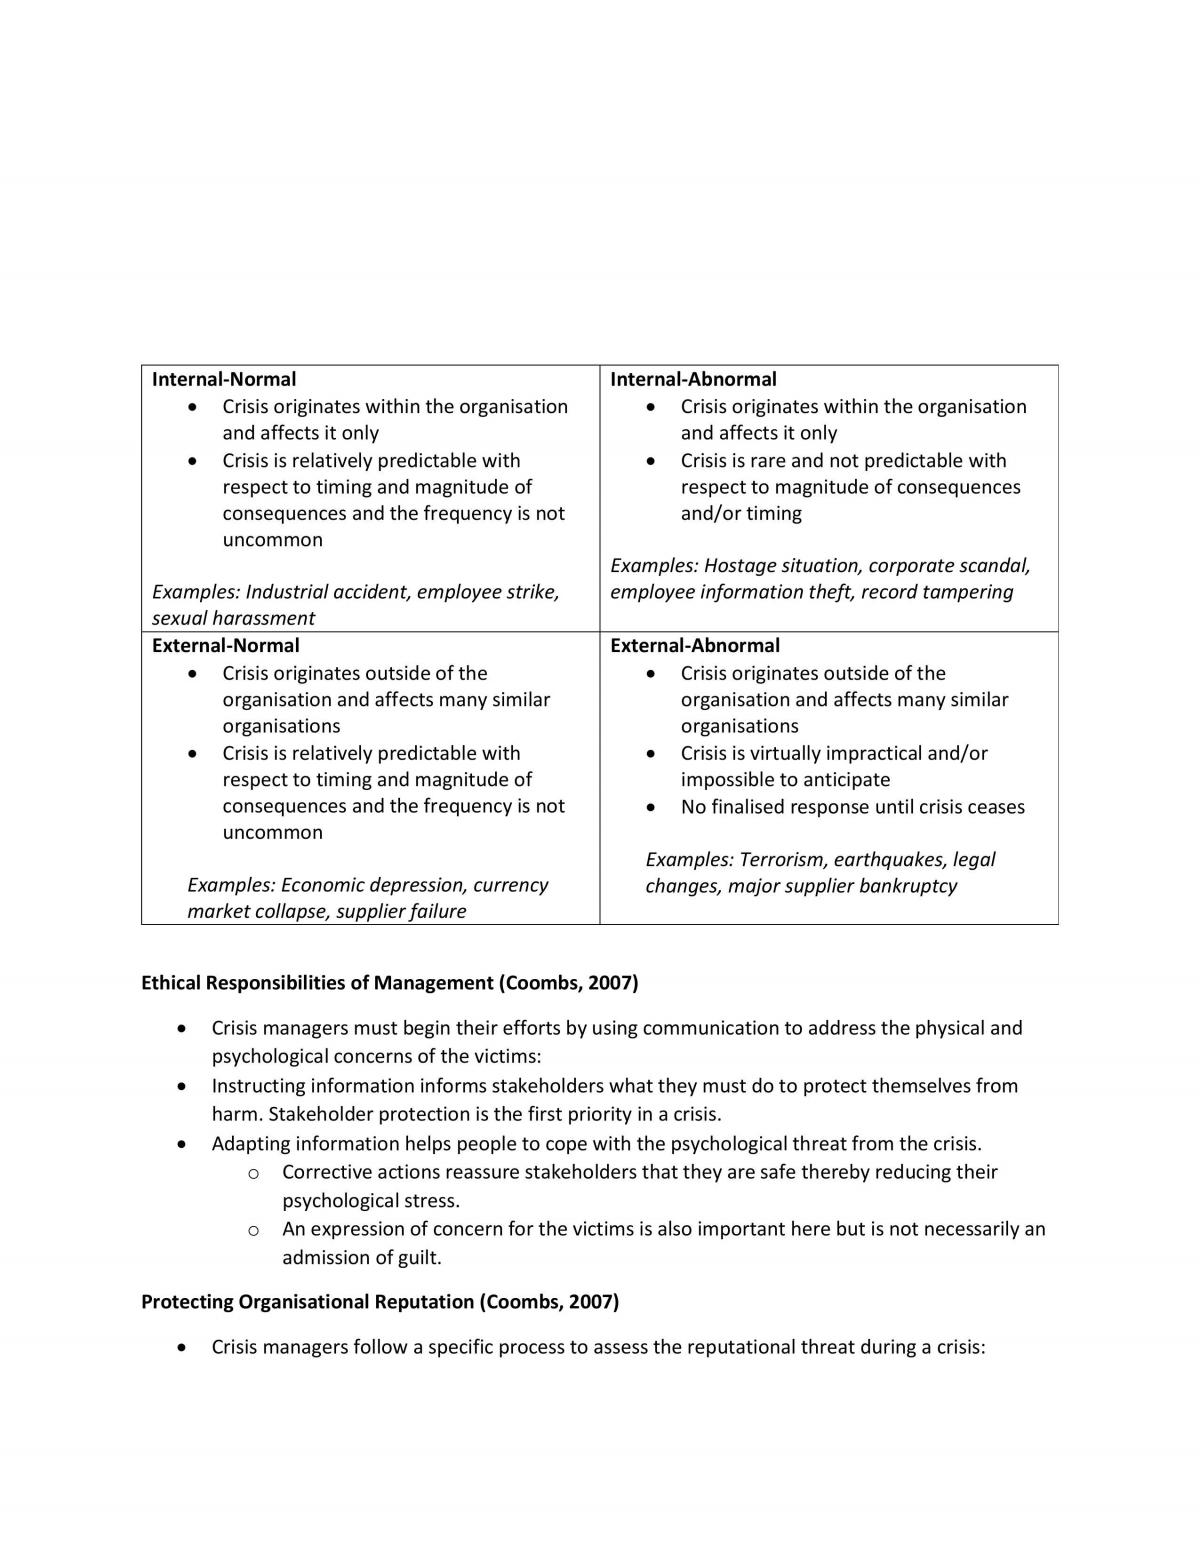 MGTS2606 - Managerial Skills & Communication  - Page 26